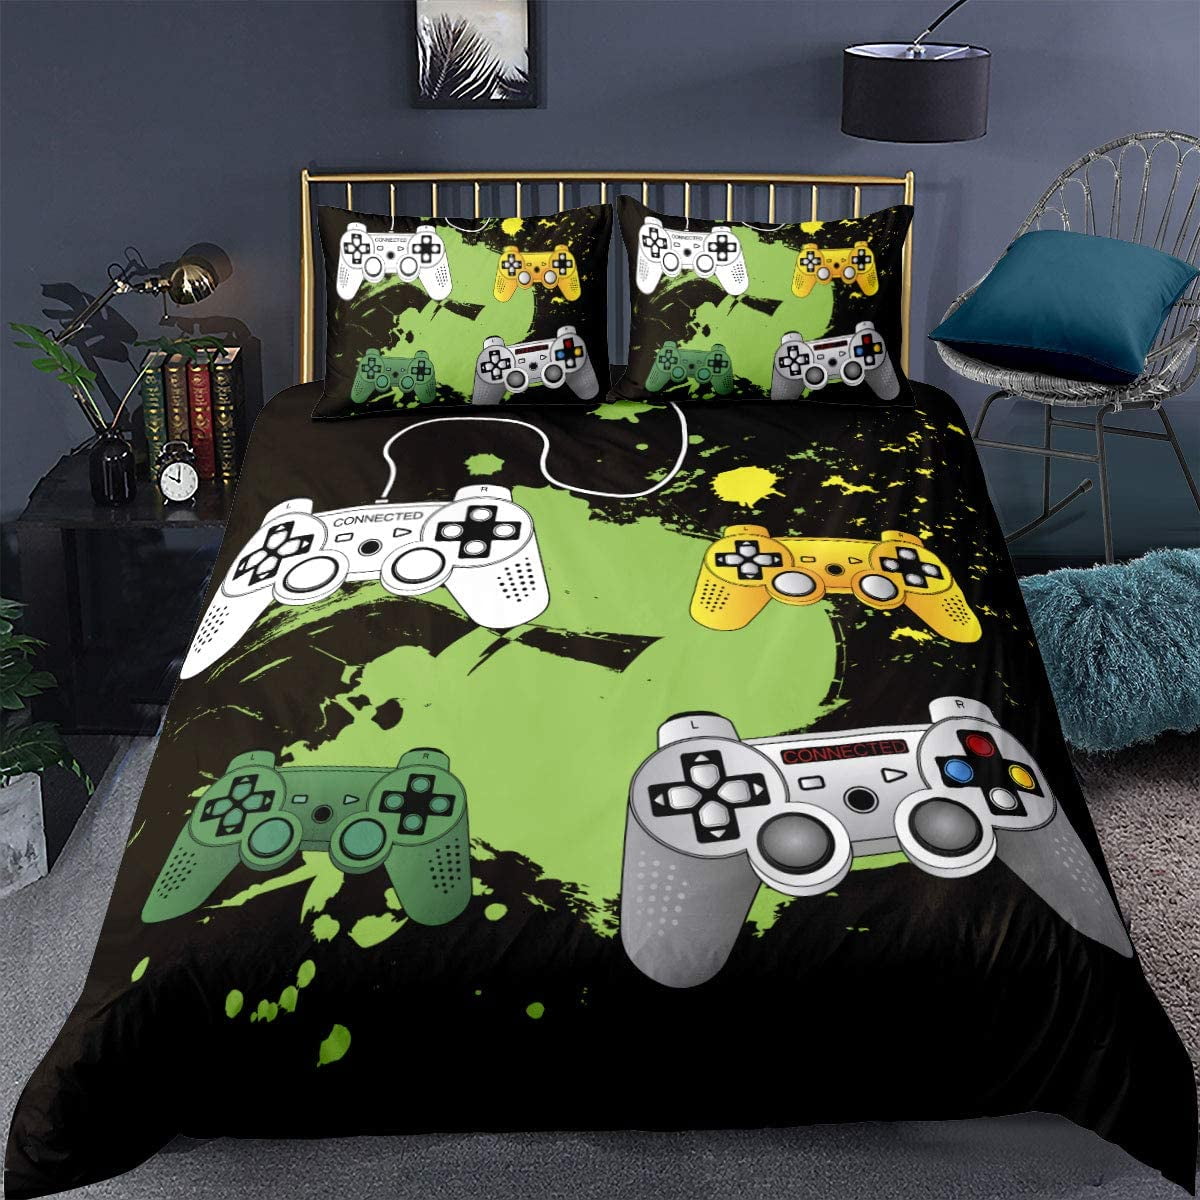 Erosebridal Games Bedspread Decorative 3 Piece Bedding Set with 2 Pillow Cases Kids Gamepad Printed Quilted Coverlet Modern Vr Gamer Player Gaming Coverlet Set for Boys Girls Teens King Size